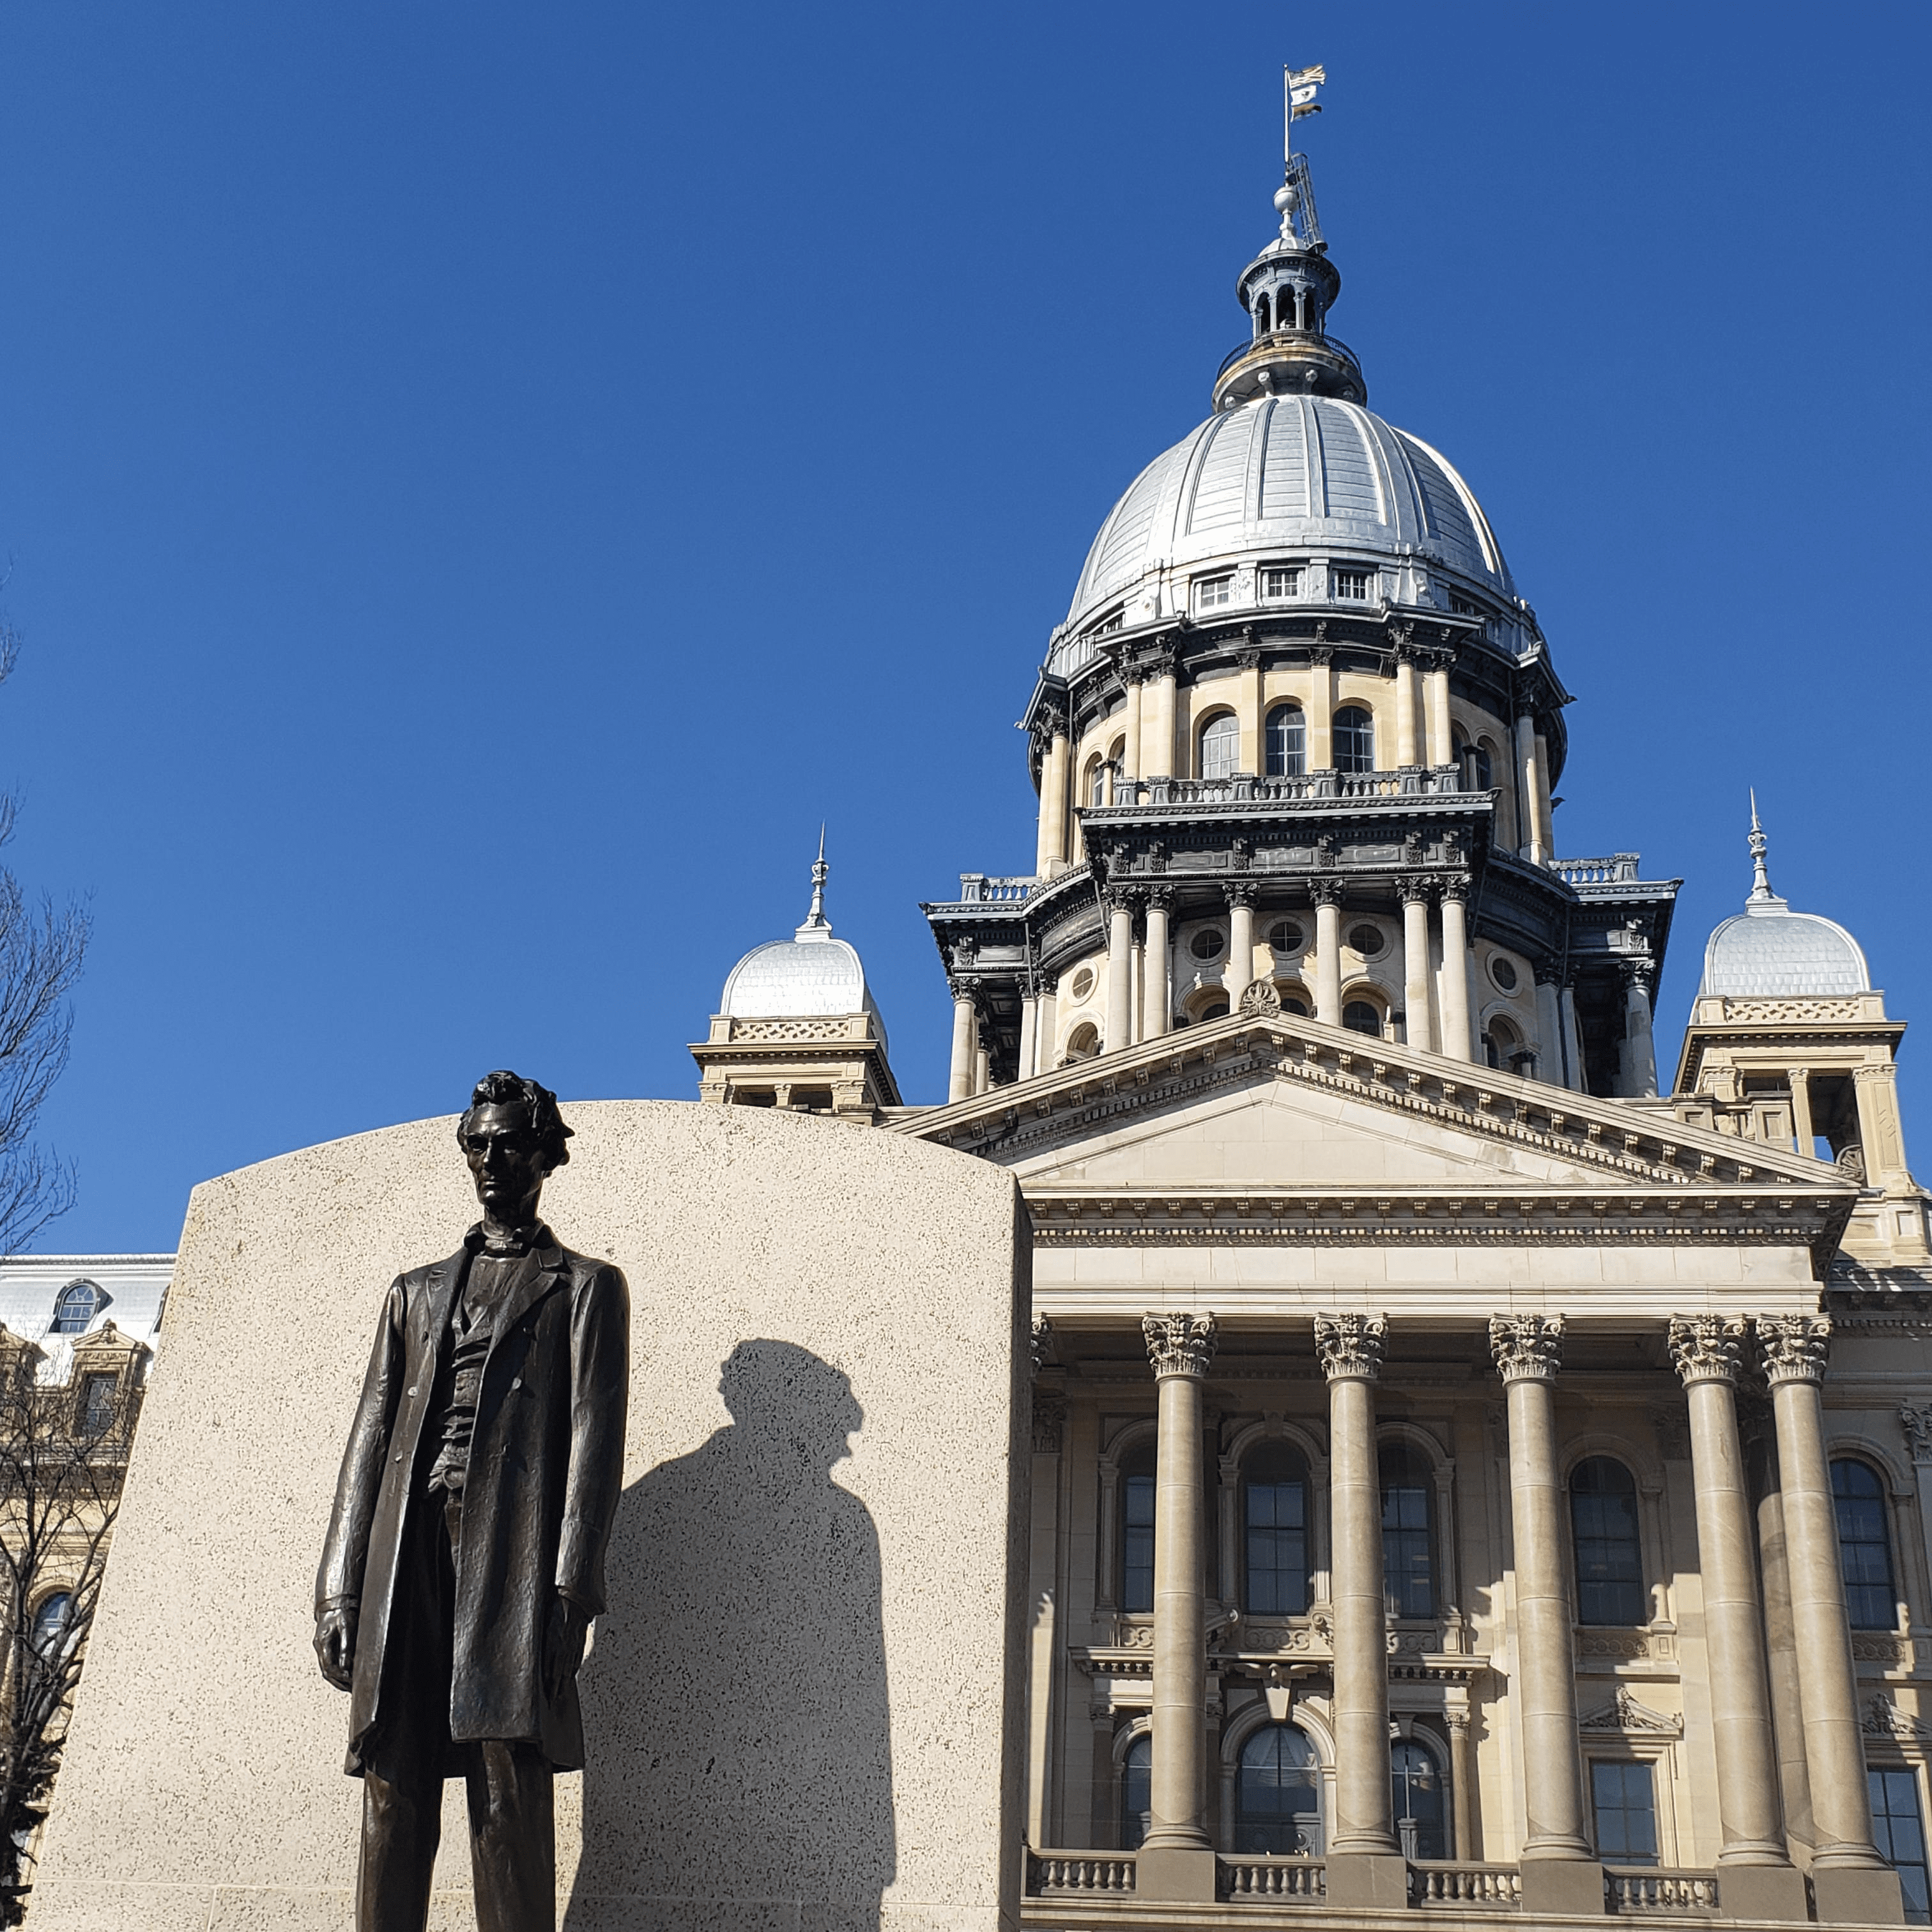 The statue of Abraham Lincoln in front of the IL State Capitol building and a blue sky.